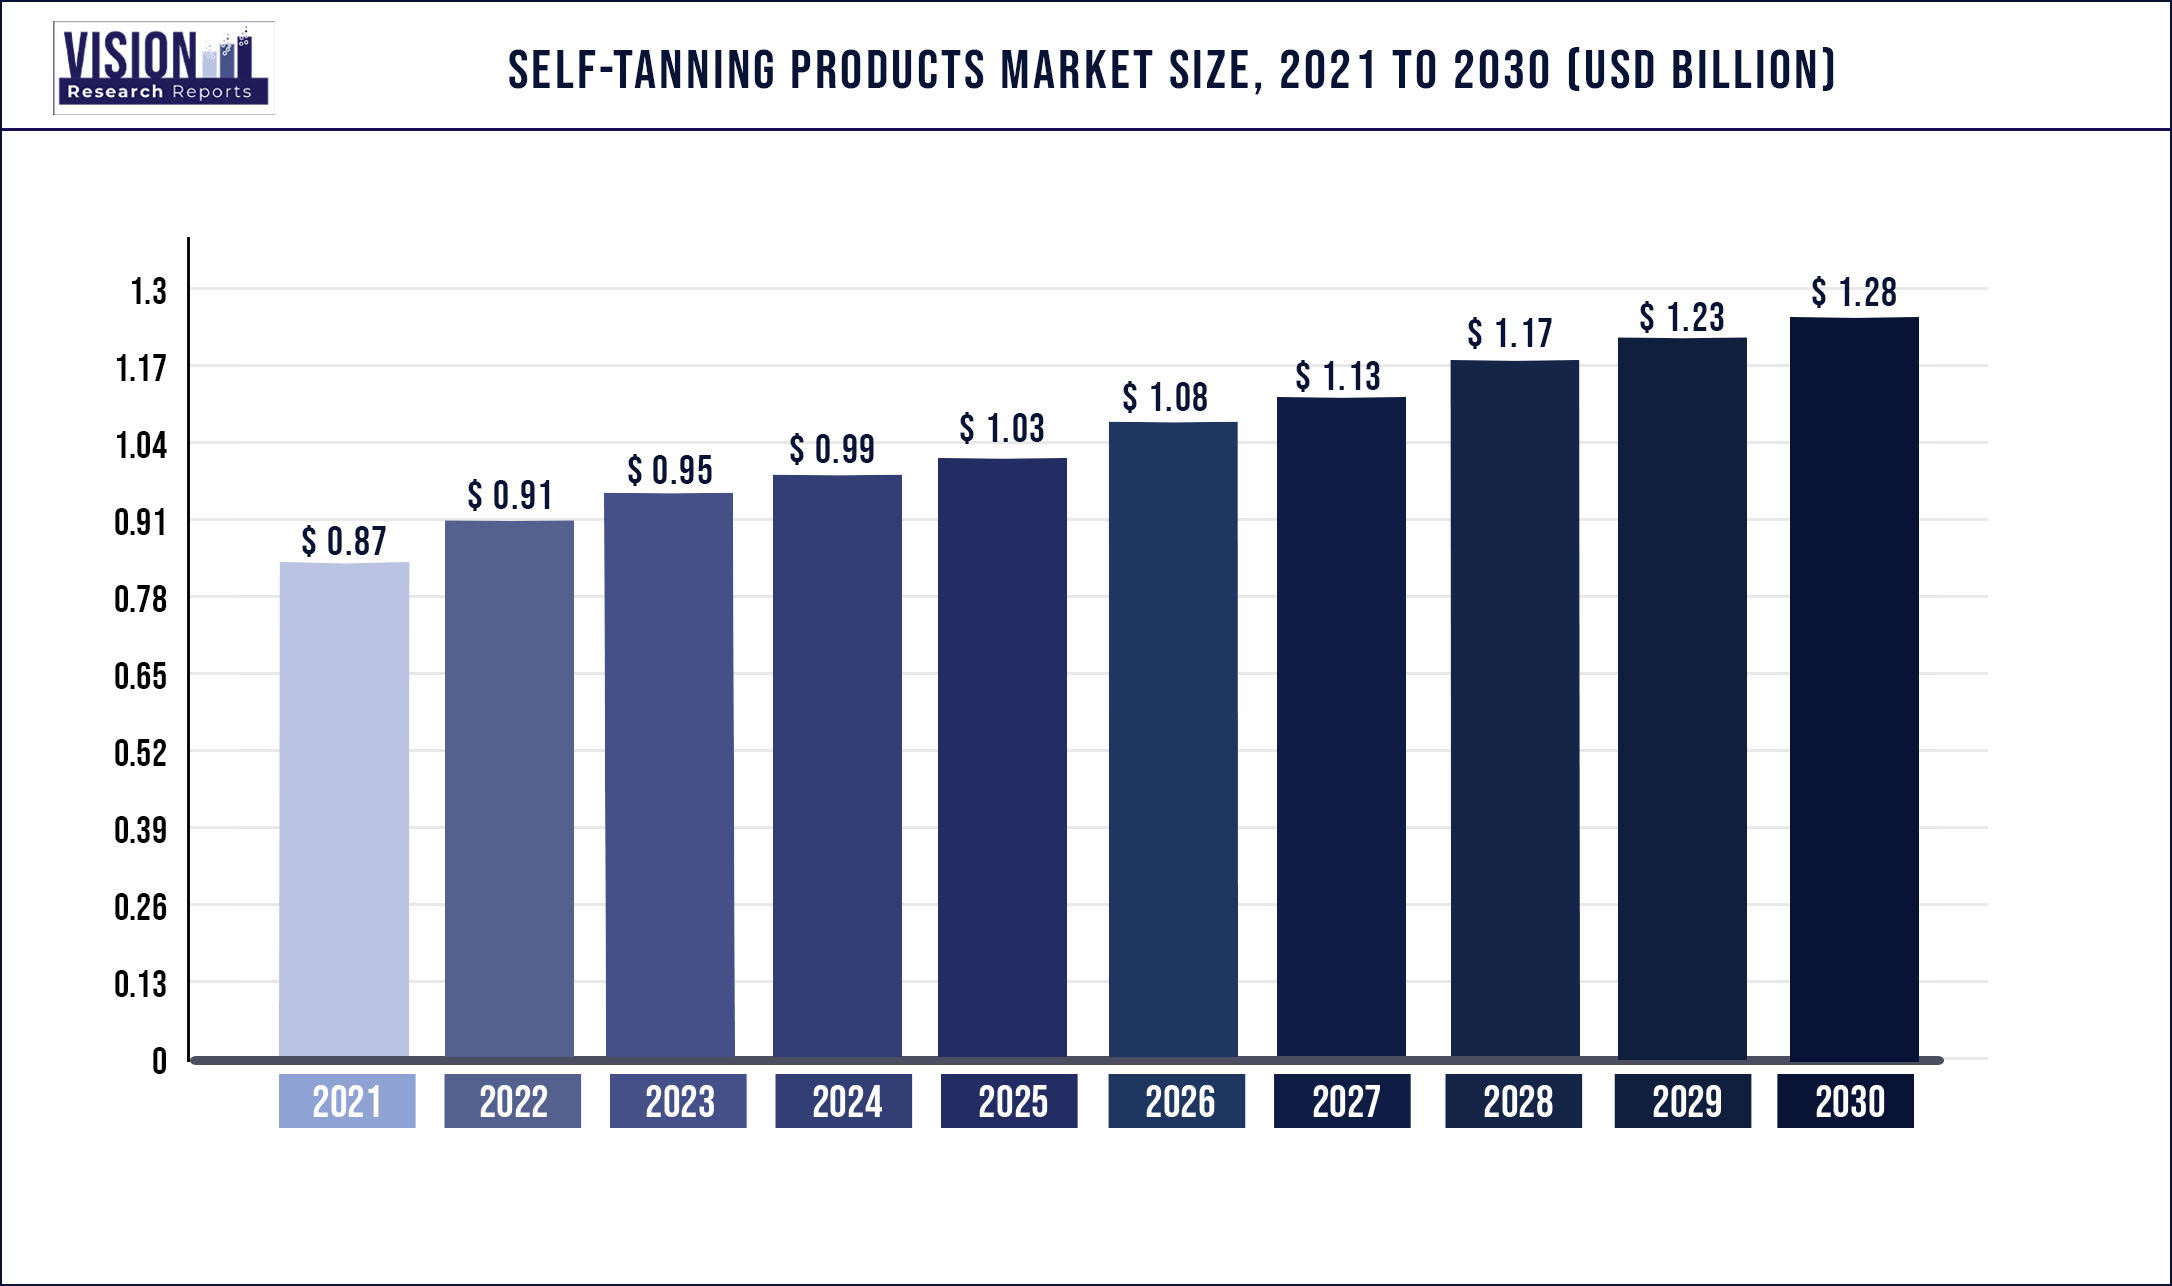 Self-tanning Products Market Size 2021 to 2030